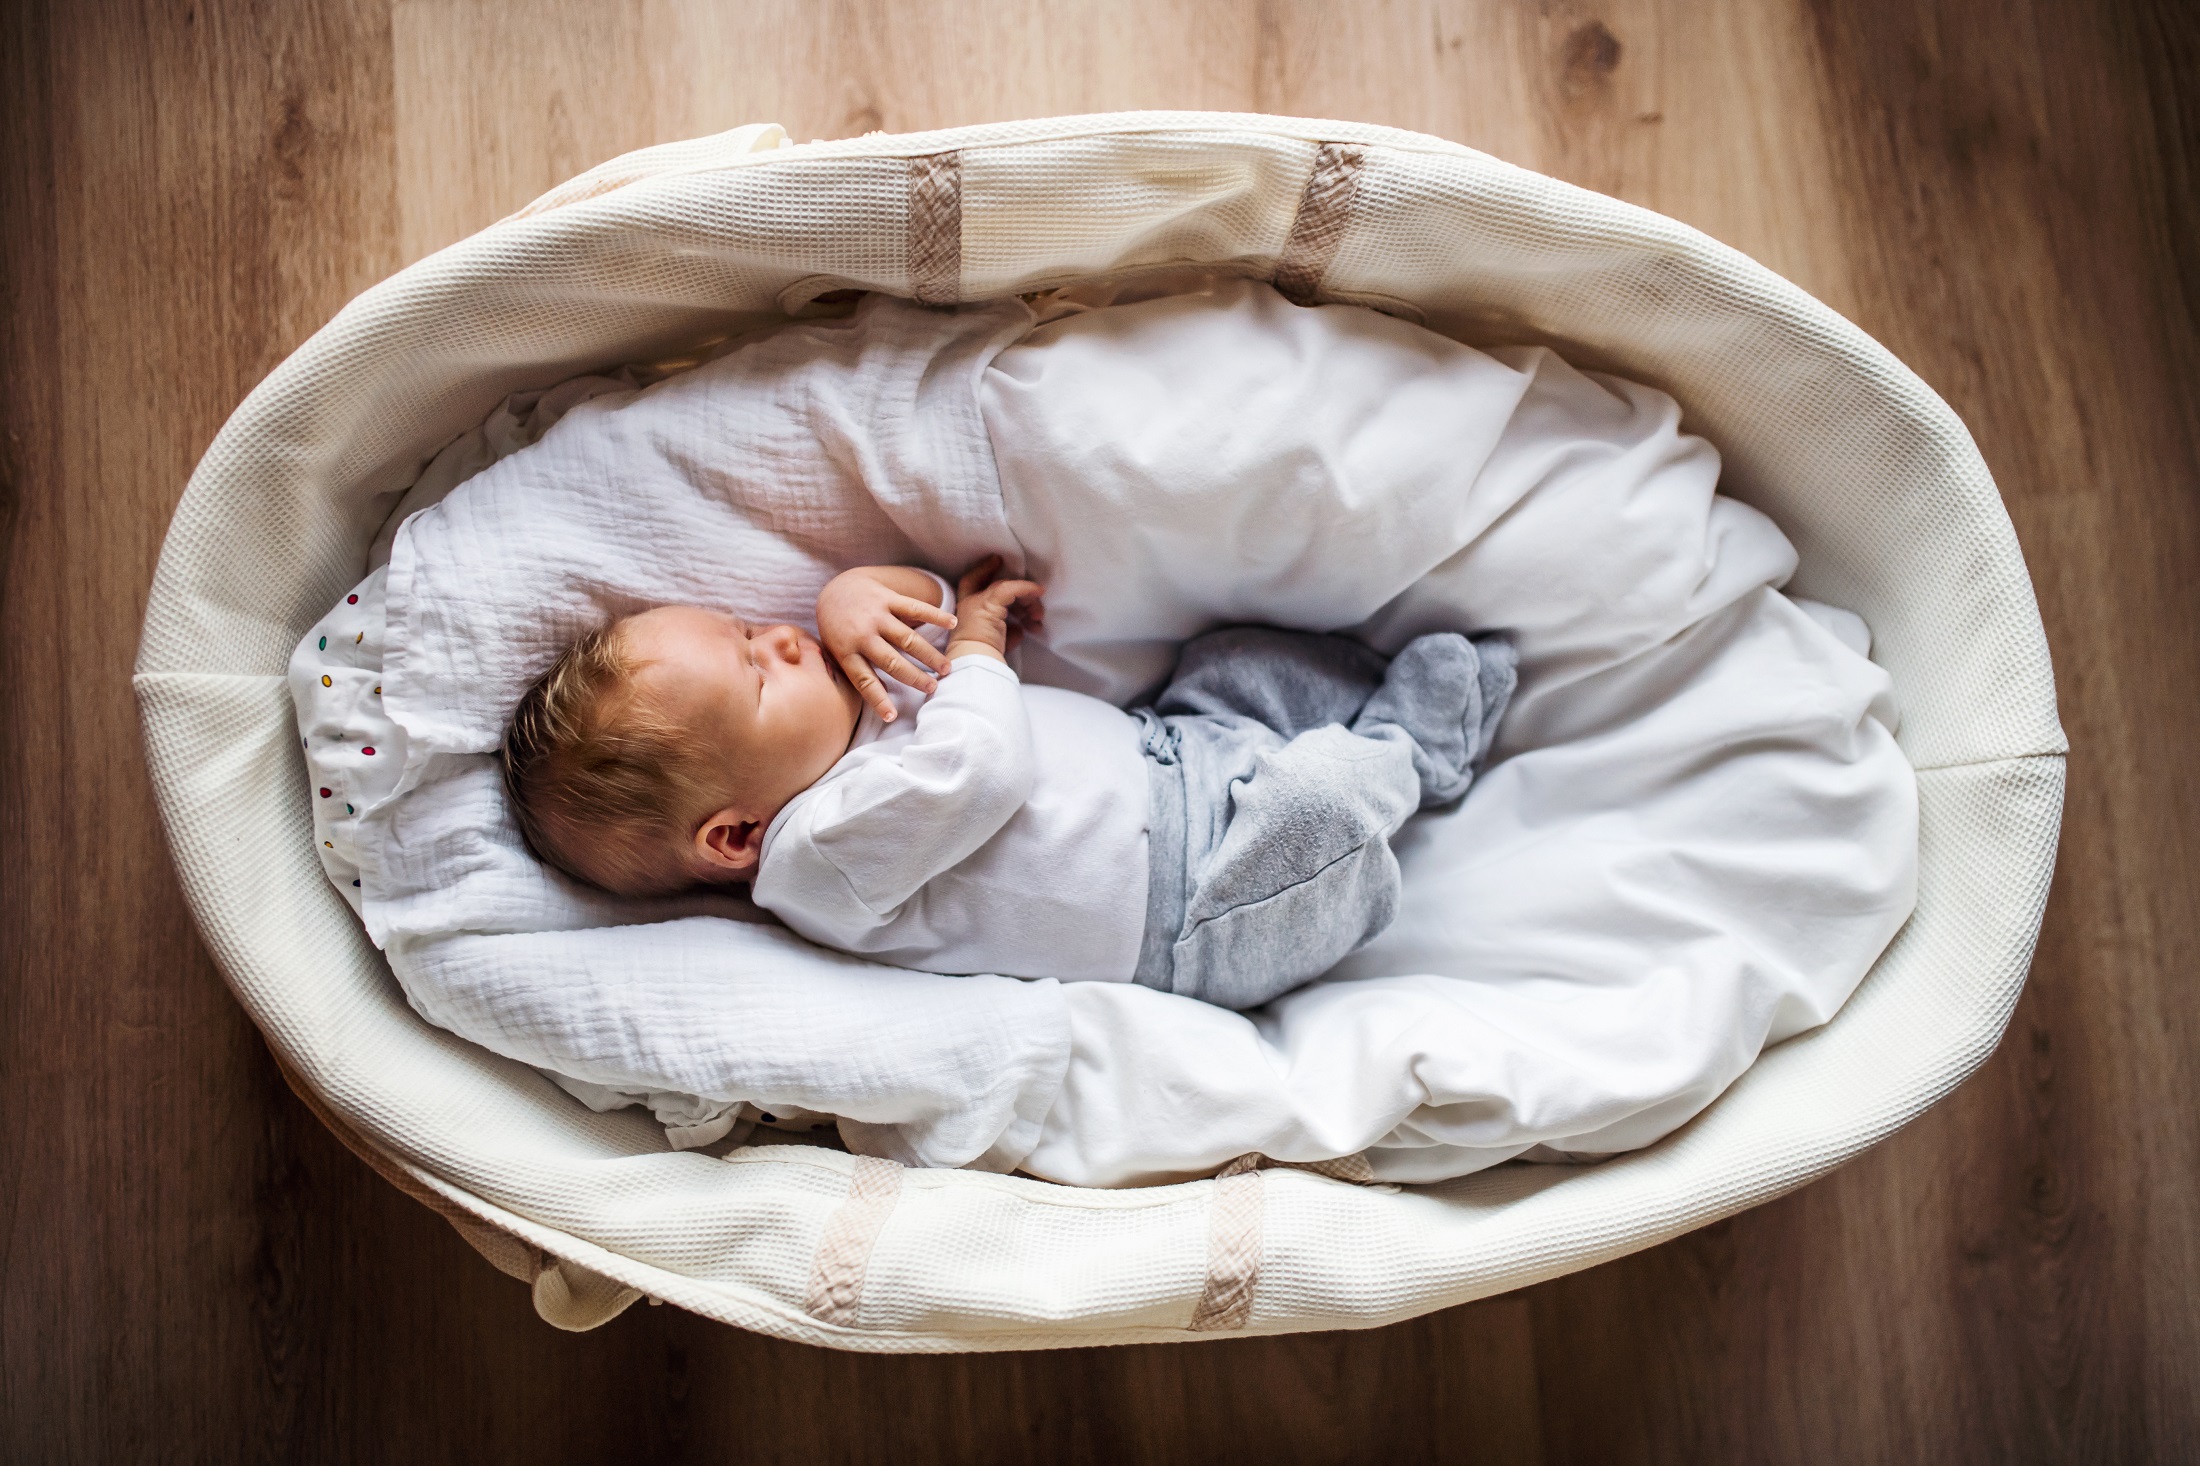 Moses basket for a newborn baby – we suggest which model to choose